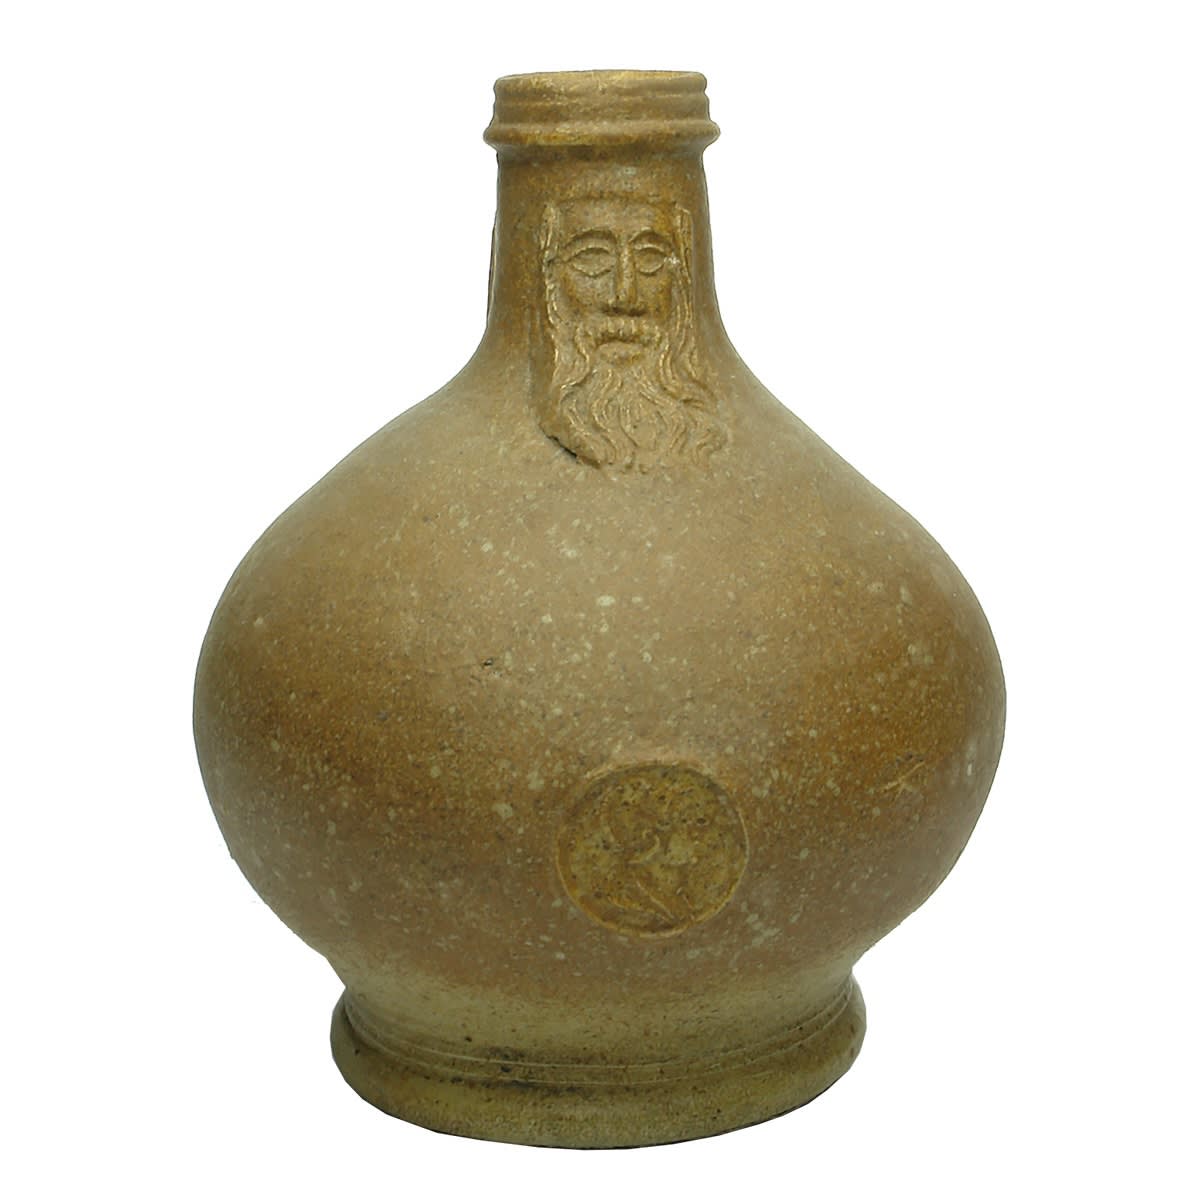 Pottery. Bellarmine with Bearded Man and Circle with Man's Bust to Mid Body.